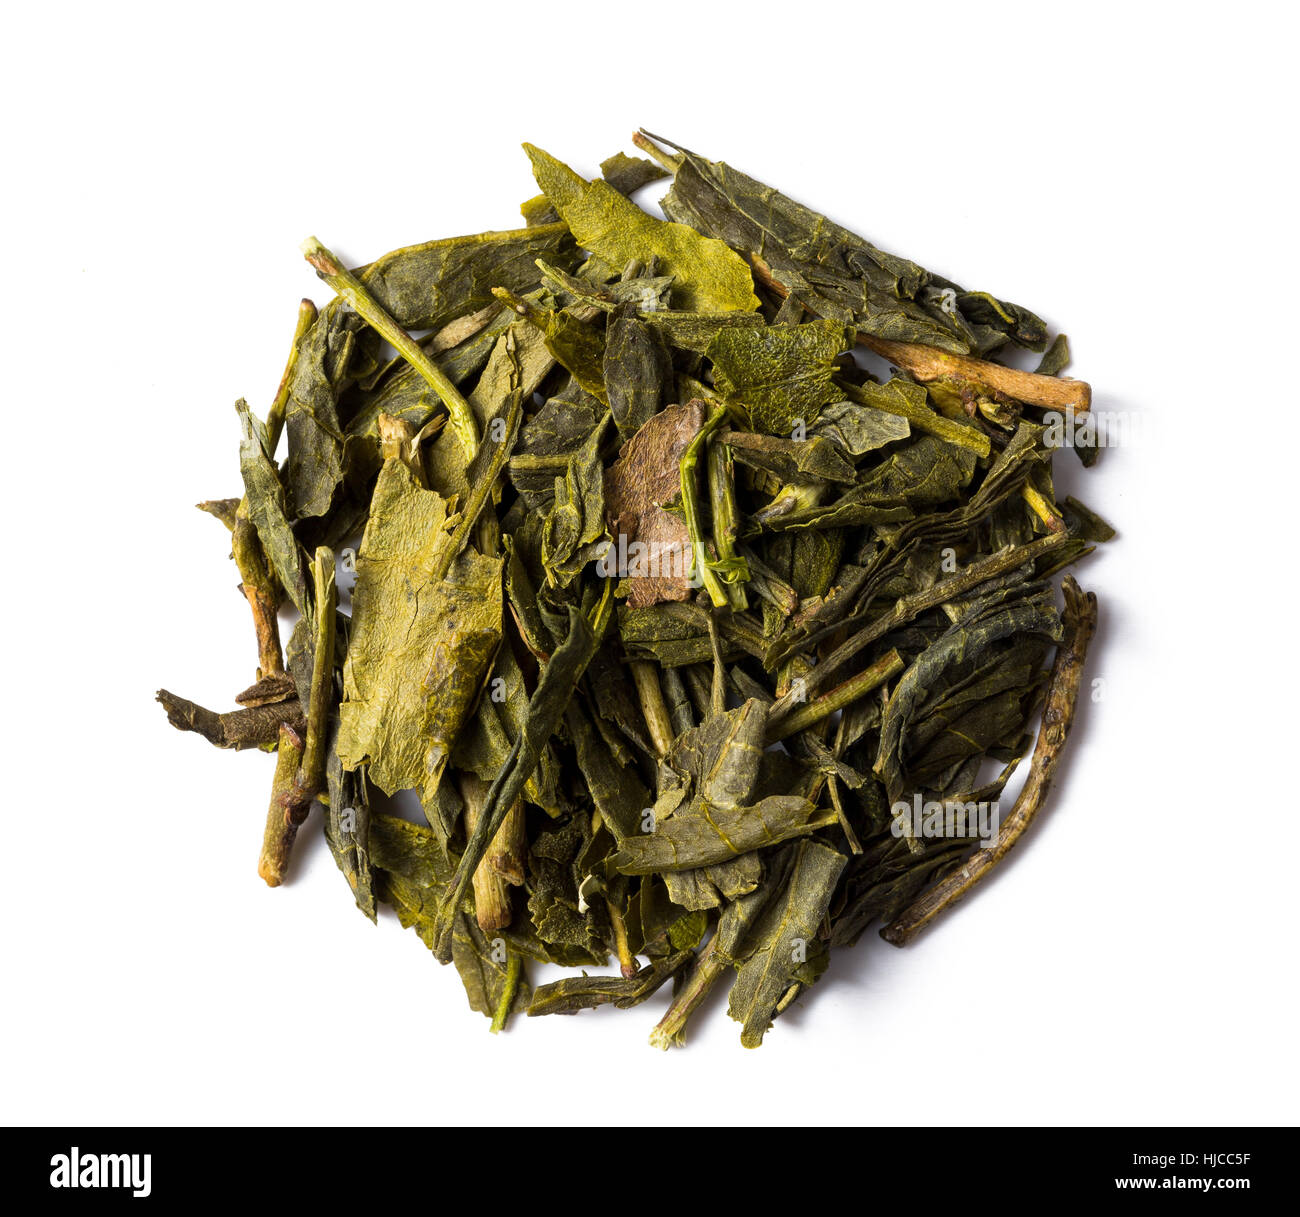 Heap of dried leaves green tea bancha japanese isolated on white background, view from above. Stock Photo